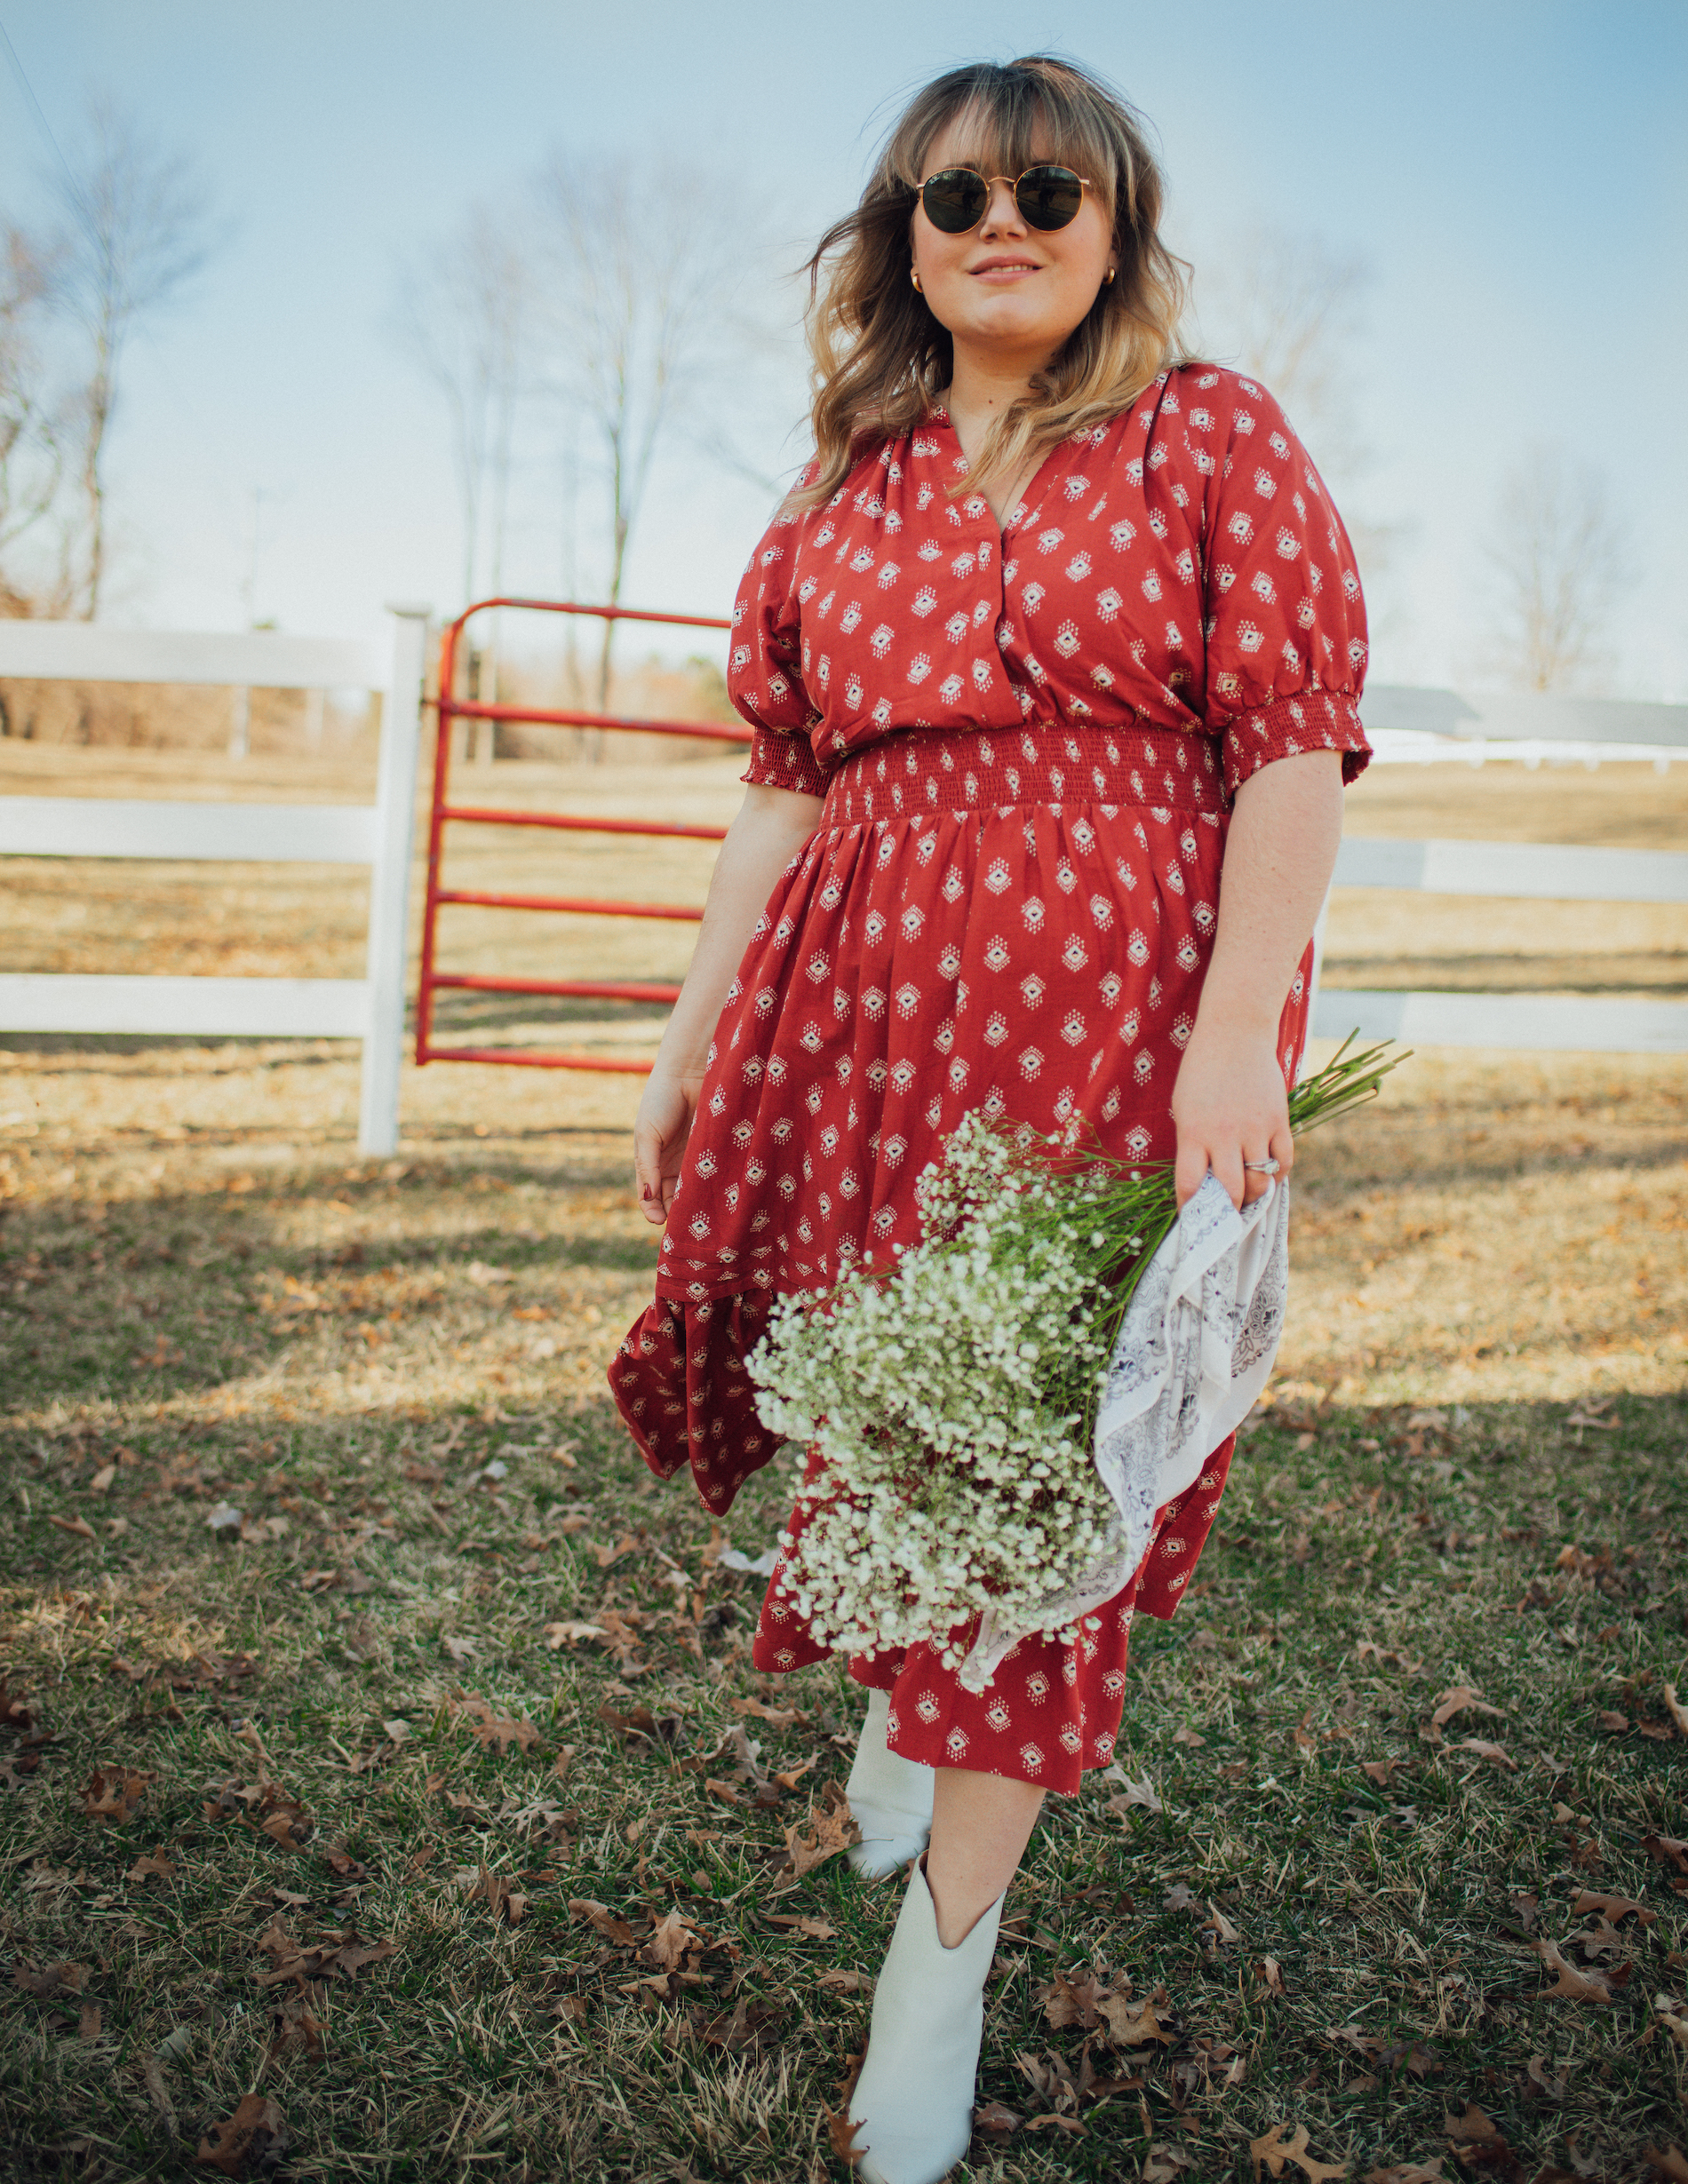 Spring Dresses To Wear Now And Into Summer. Today I am sharing some chic plus size spring dress options that are versatile enough for summer.